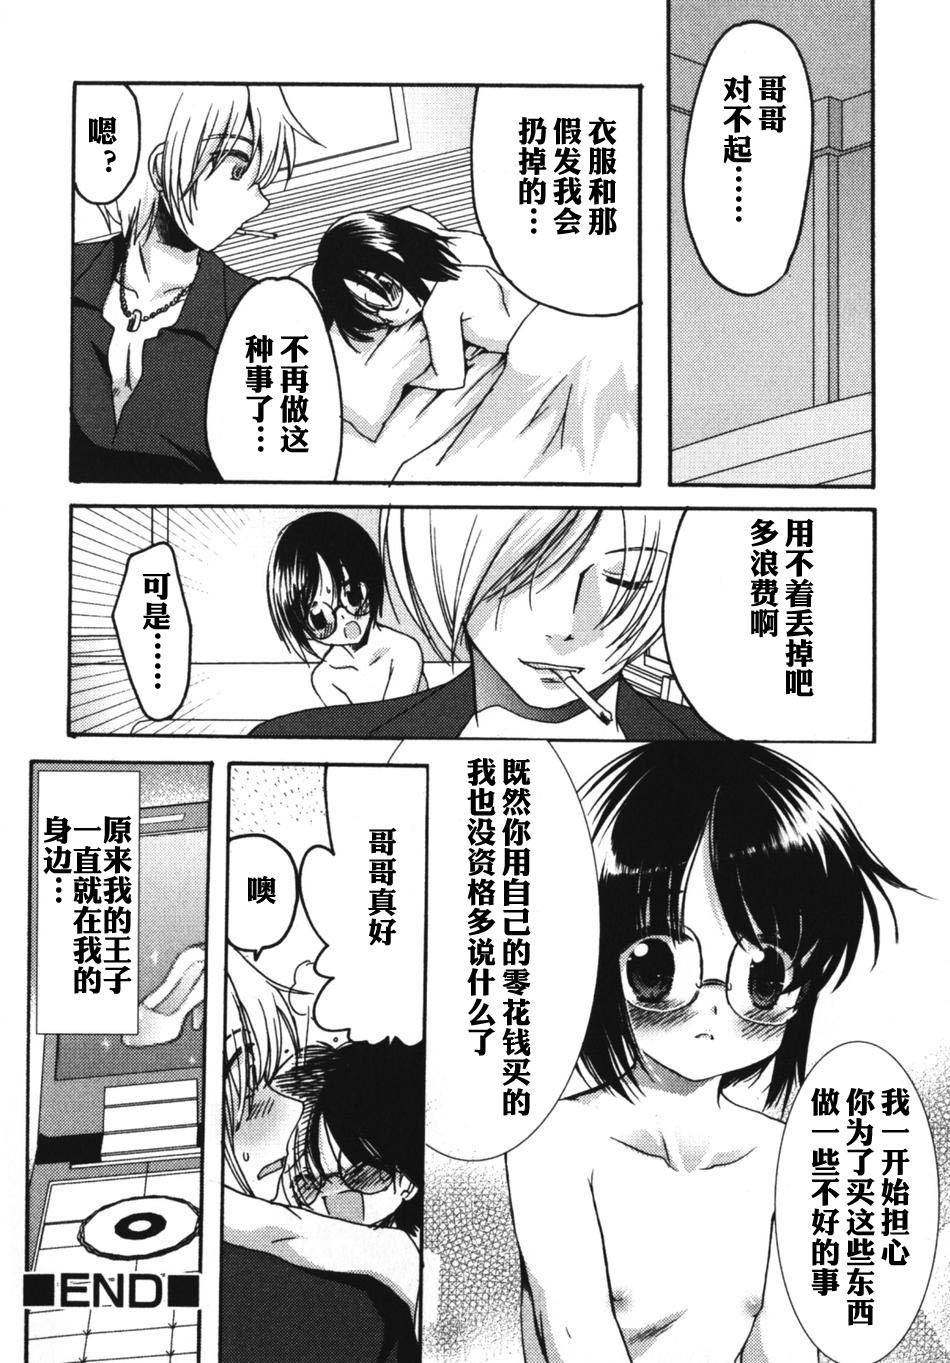 Old Young 【空想少年汉化】 [Silhouette Sakura]Cinderella cage Teenie - Page 16